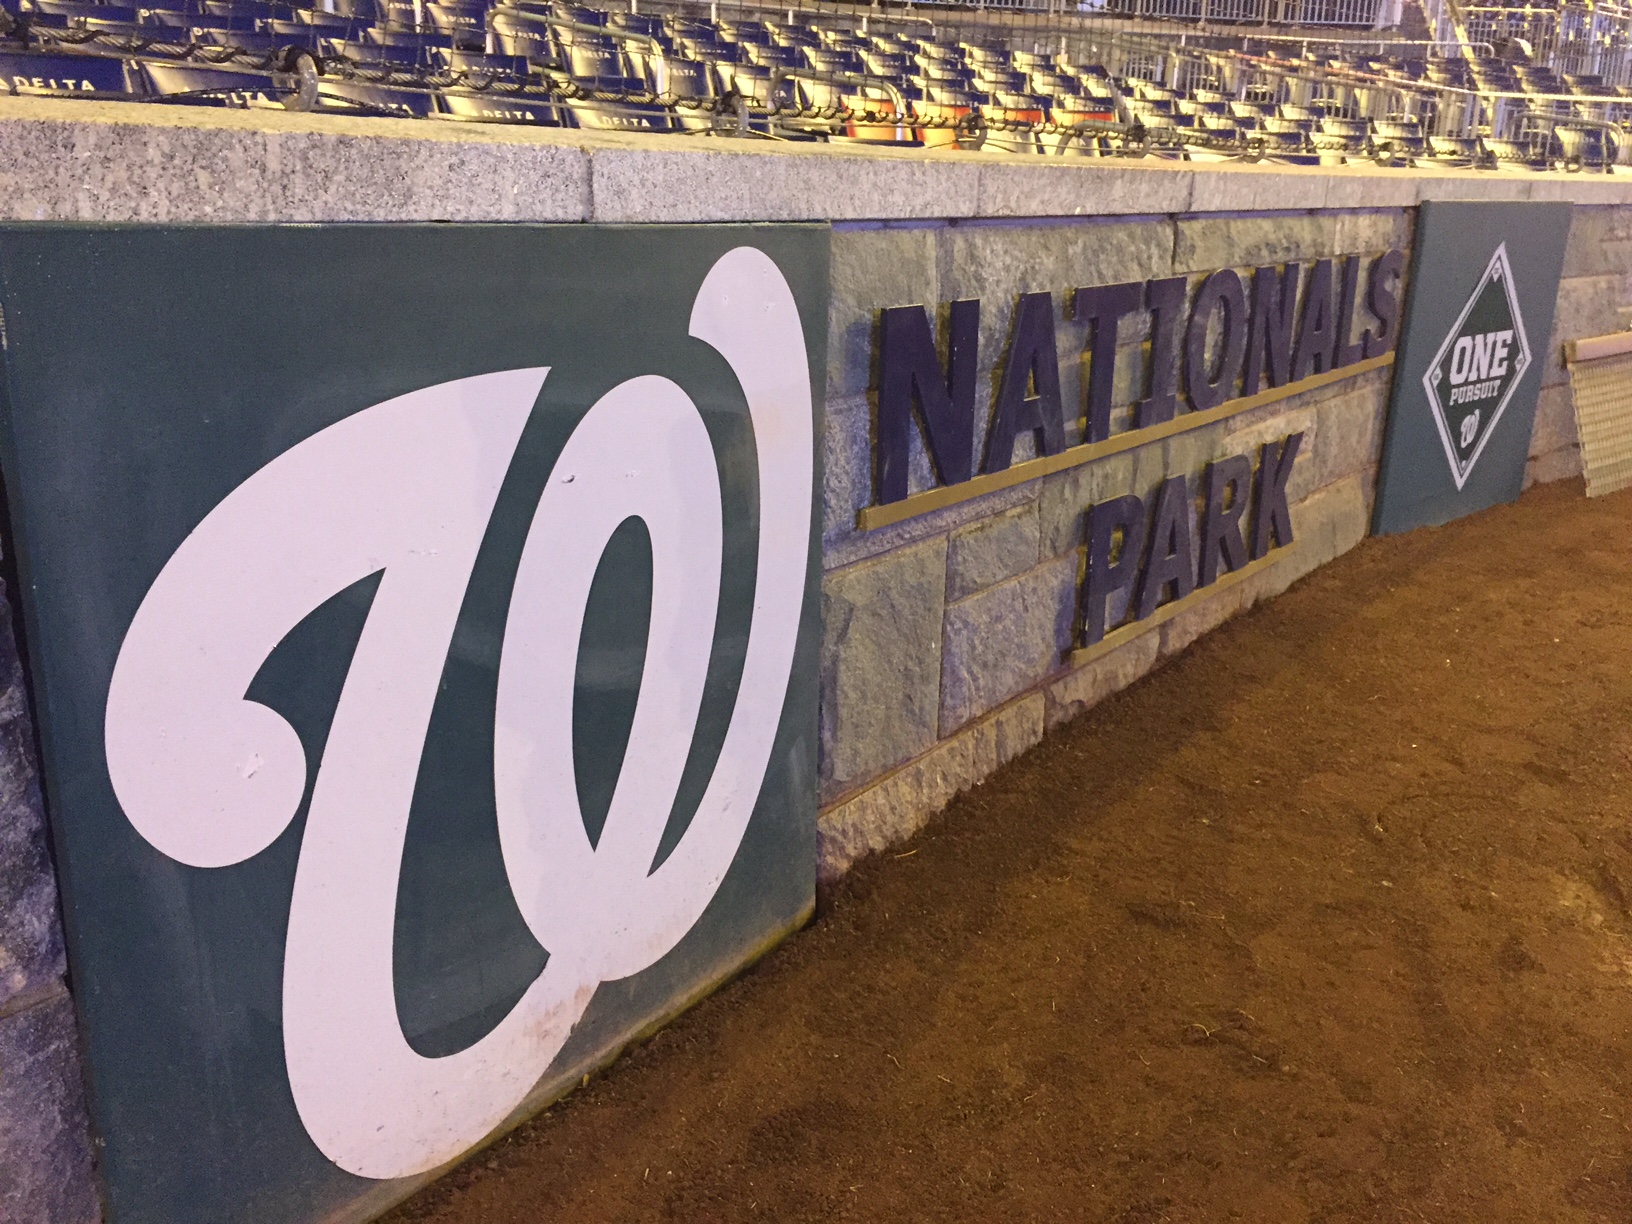 A view of Nationals Park in the predawn hours of Opening Day, April 7, 2016. (WTOP/Dennis Foley)